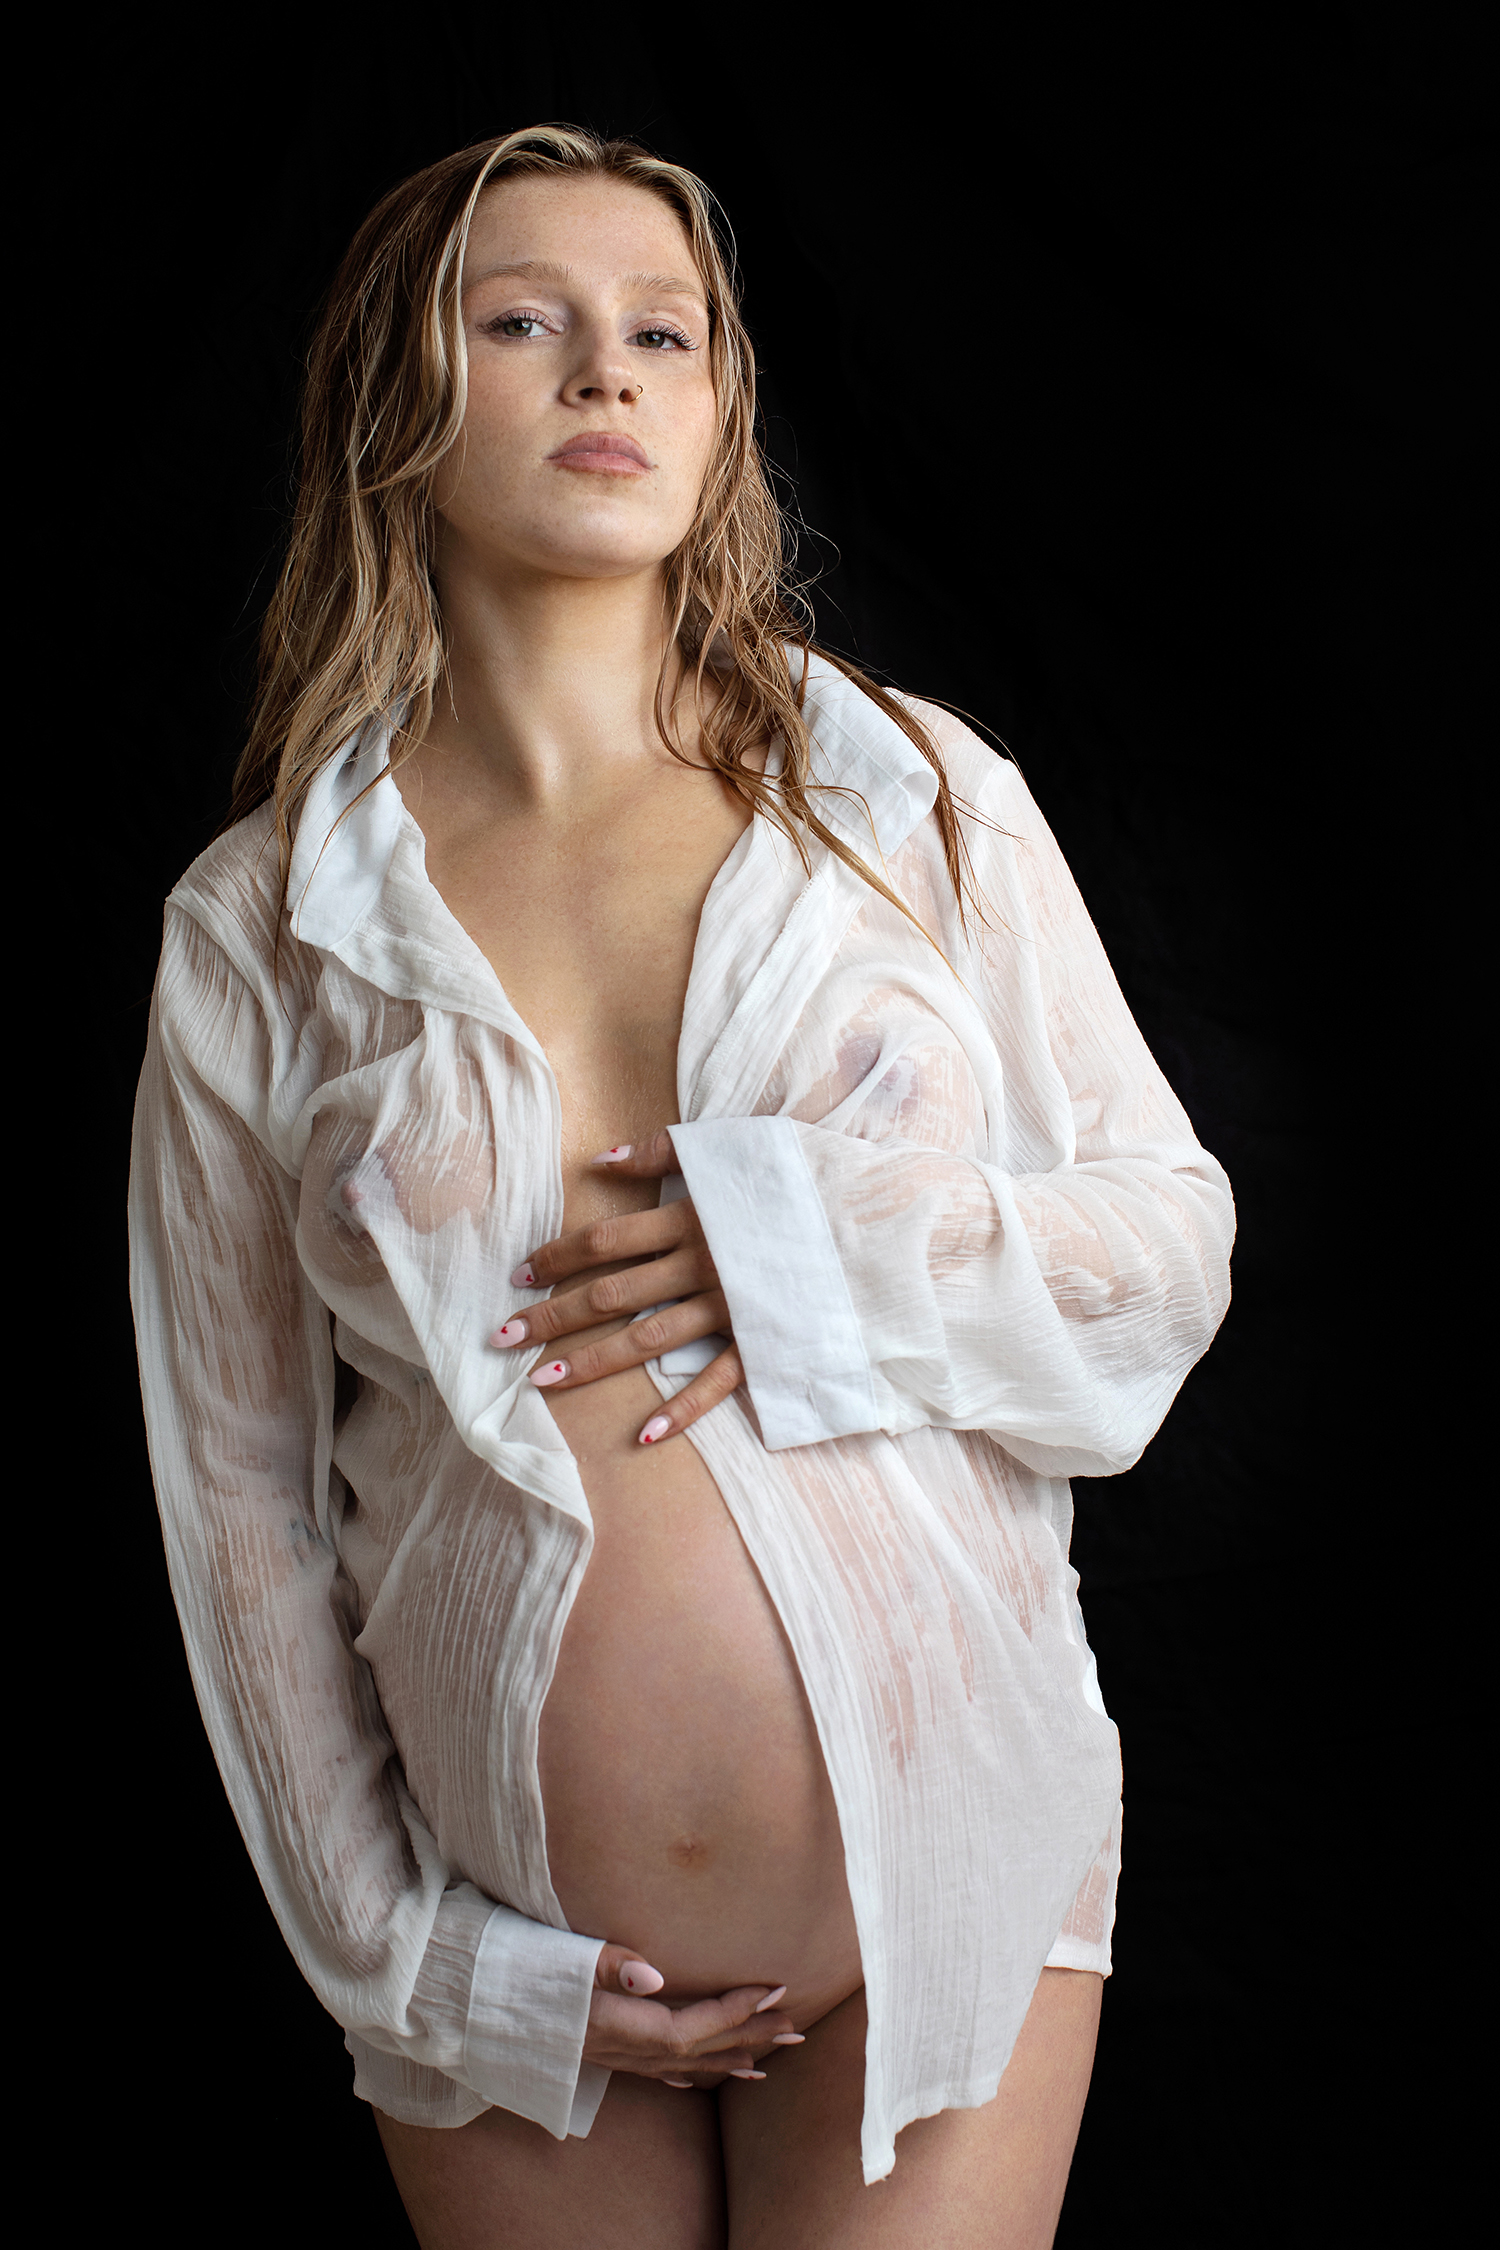 High fashion maternity photo of a woman in a white top.